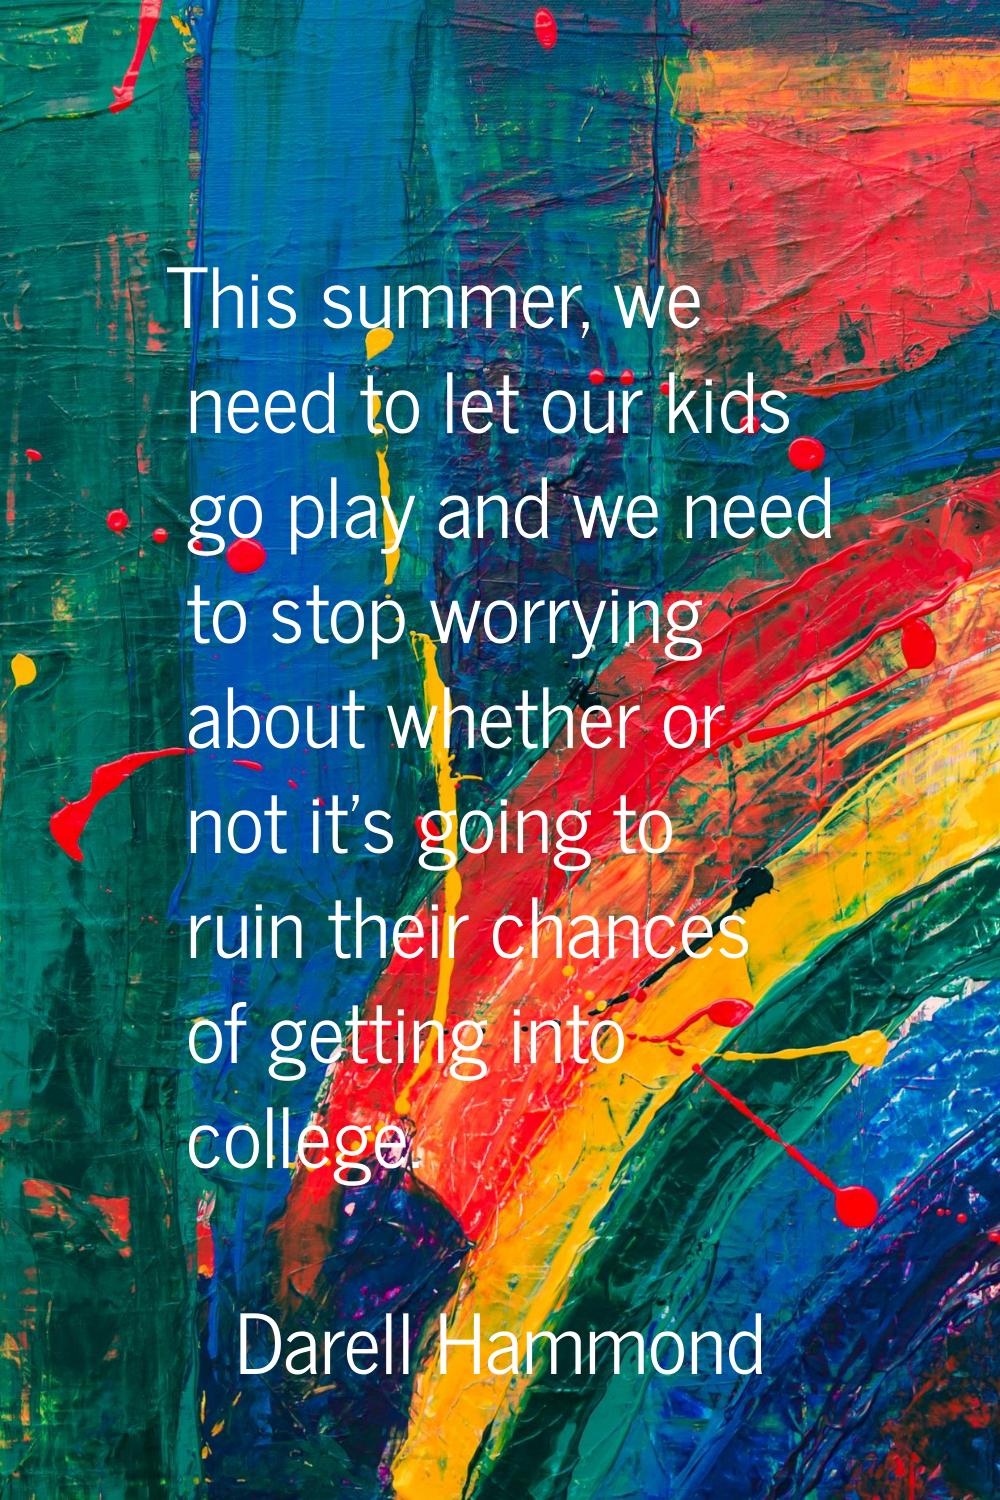 This summer, we need to let our kids go play and we need to stop worrying about whether or not it's